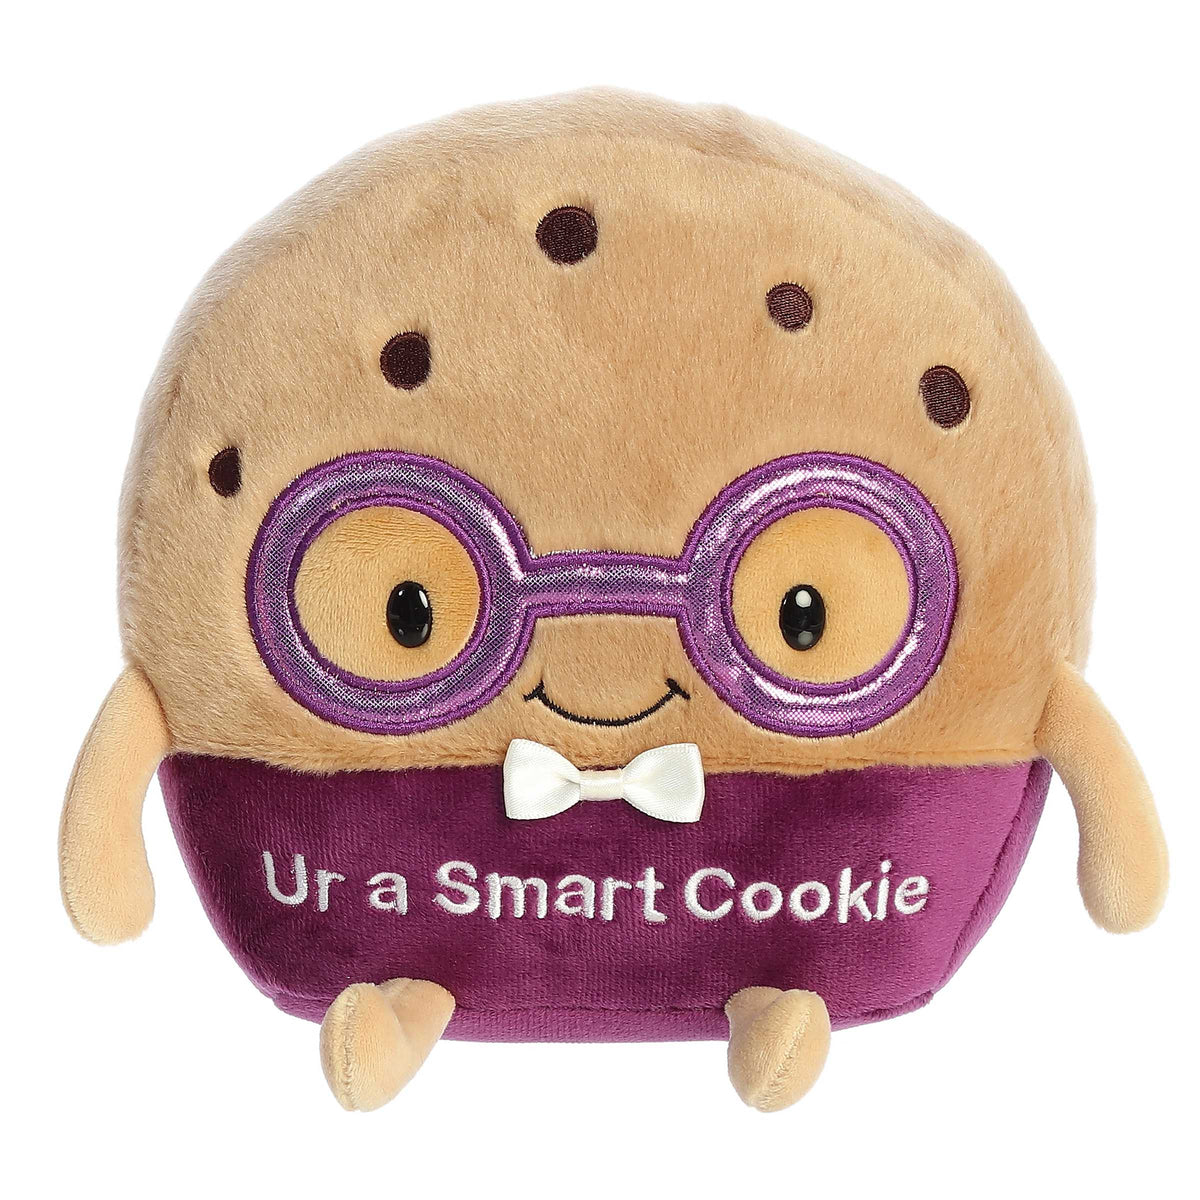 Cute cookie shaped plush toy with a light brown body, filled bean pellets, and embroidered purple glasses over a smiling face